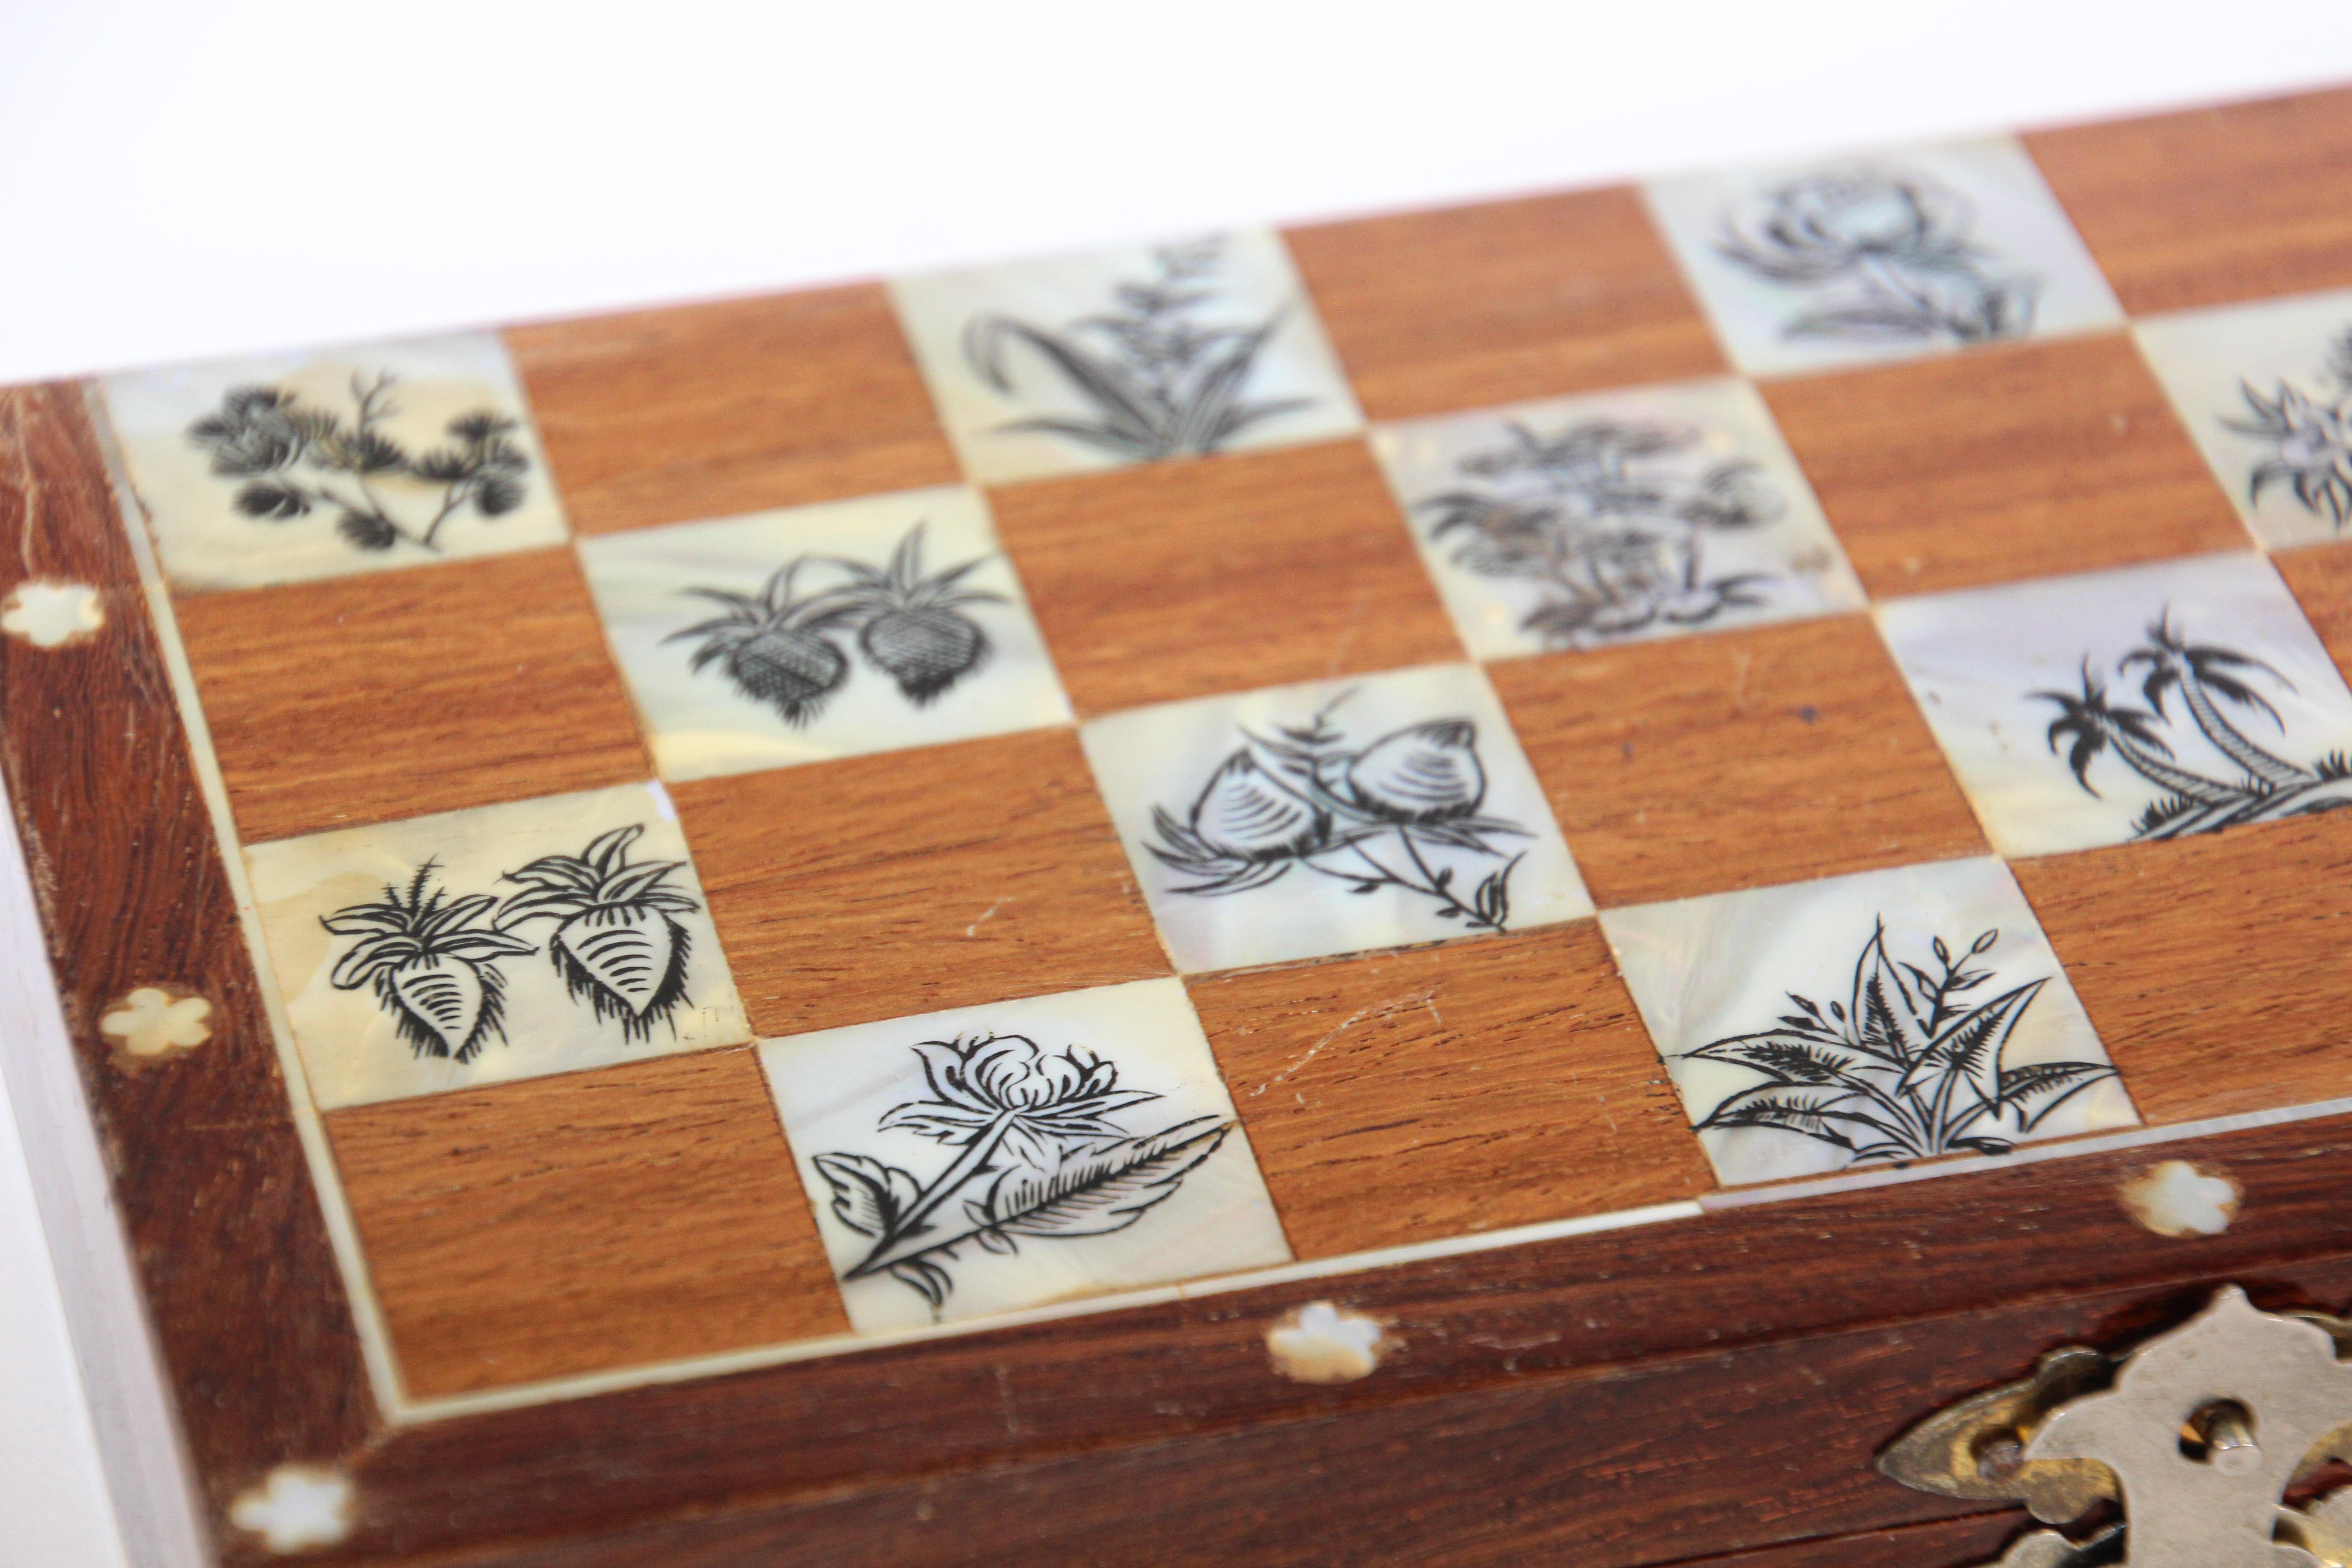 Middle Eastern Moorish Inlaid Chess Board Box For Sale 5